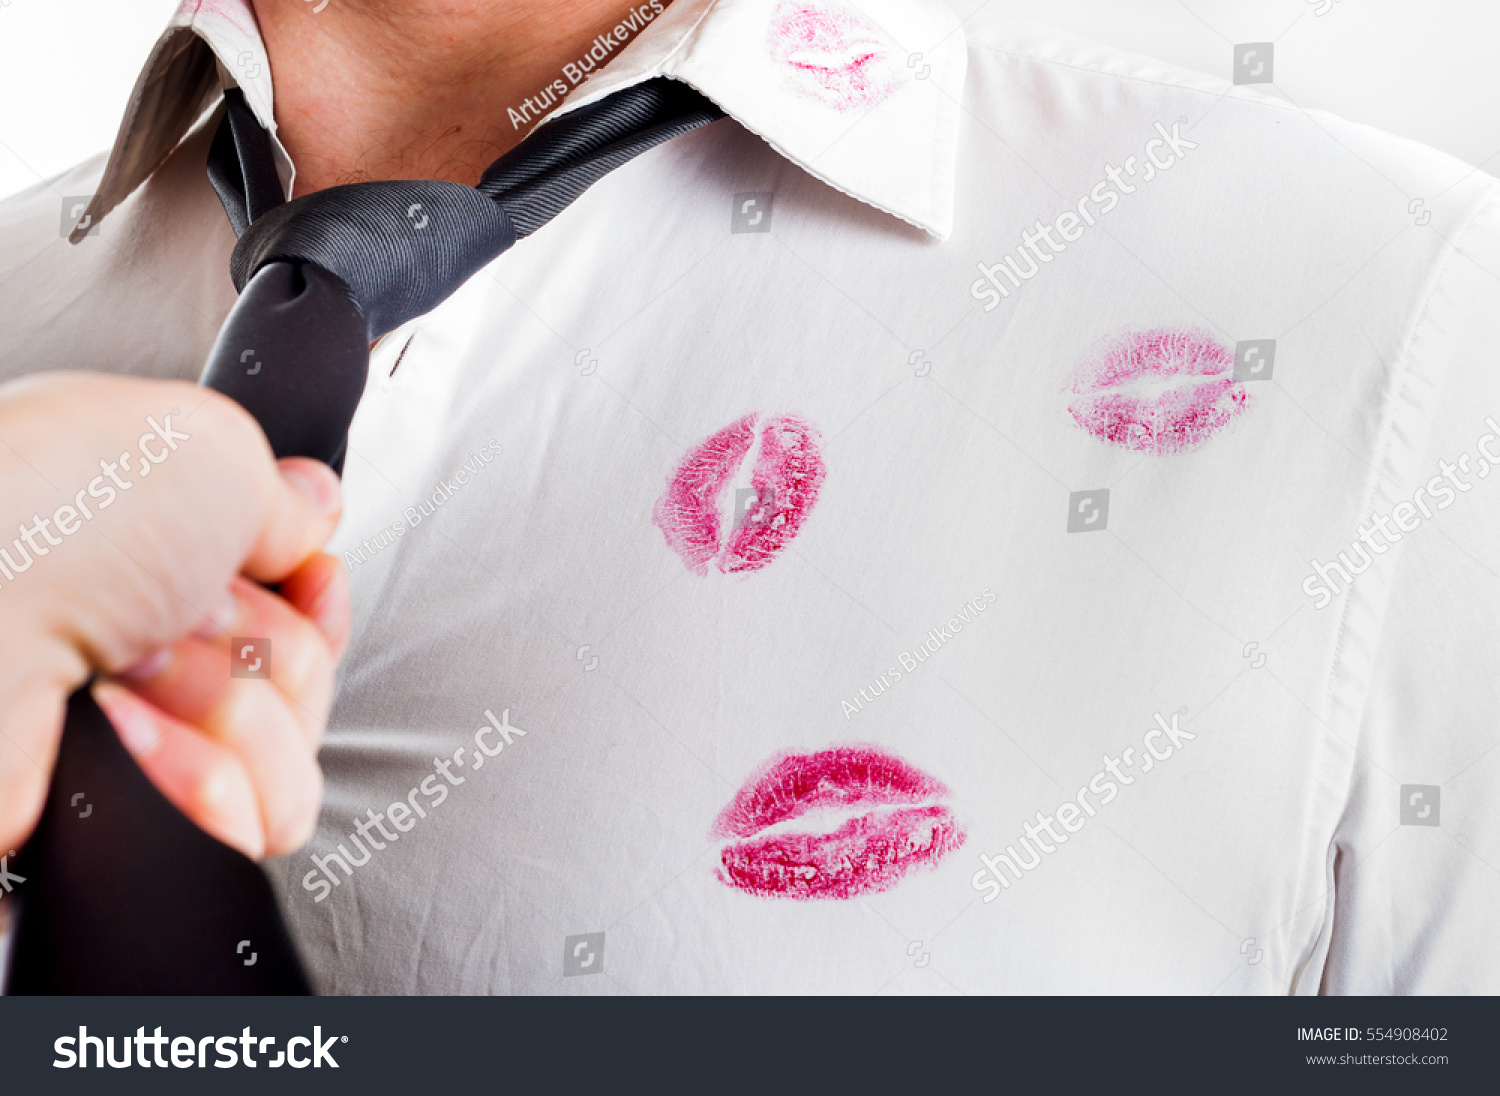 Man wearing white shirt covered by red lipstick kisses #554908402